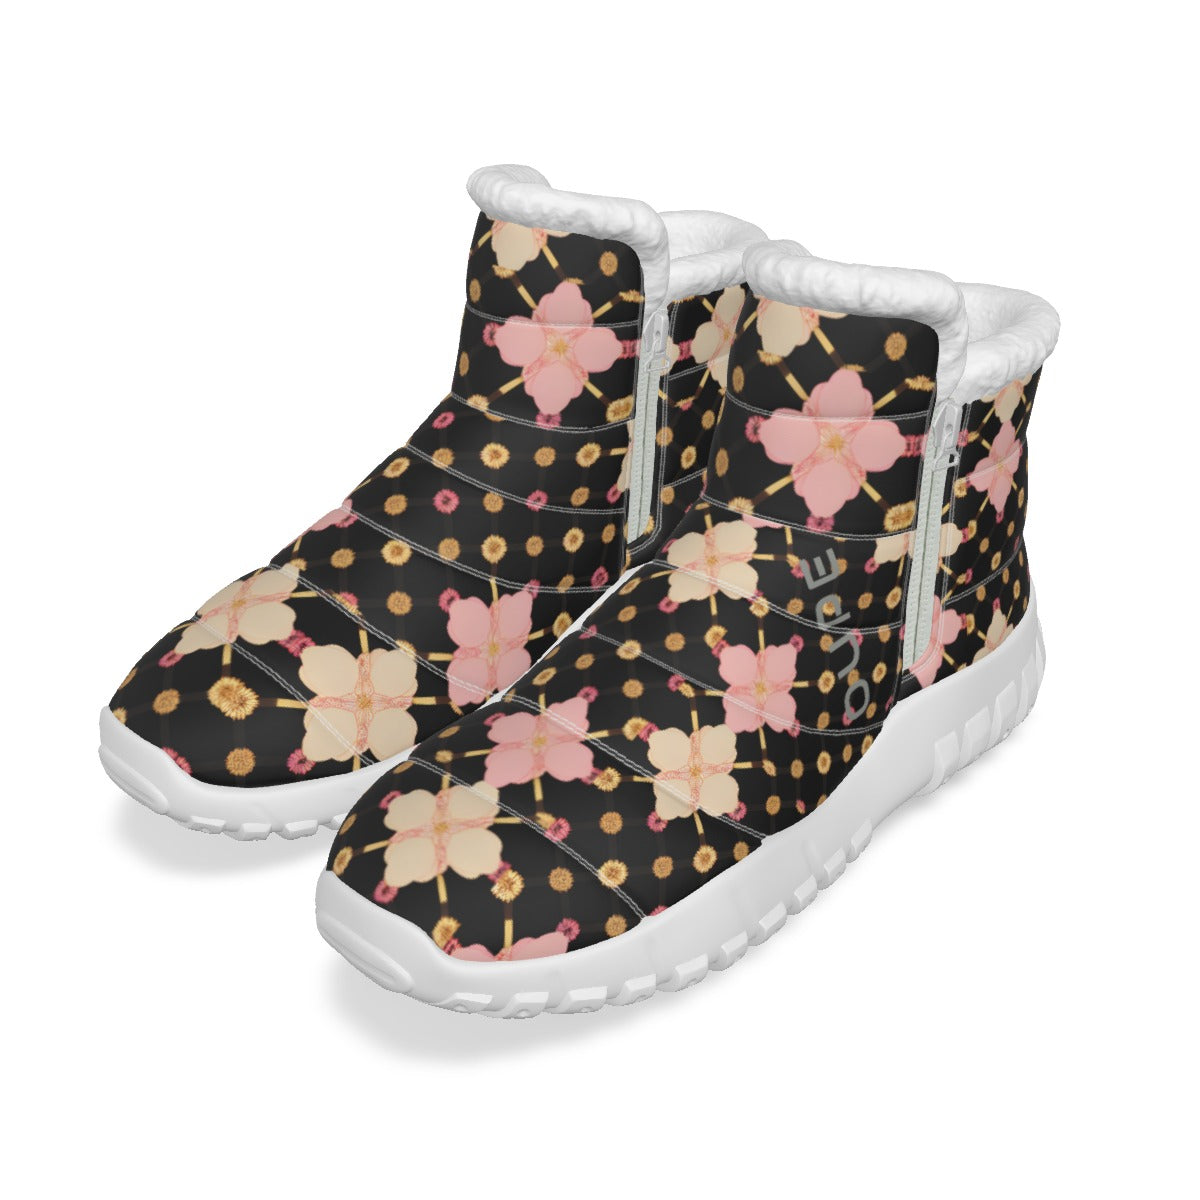 AC KAMI  OUPE "SUPER COMFORTABLE' Women's Zip-up Snow Boots